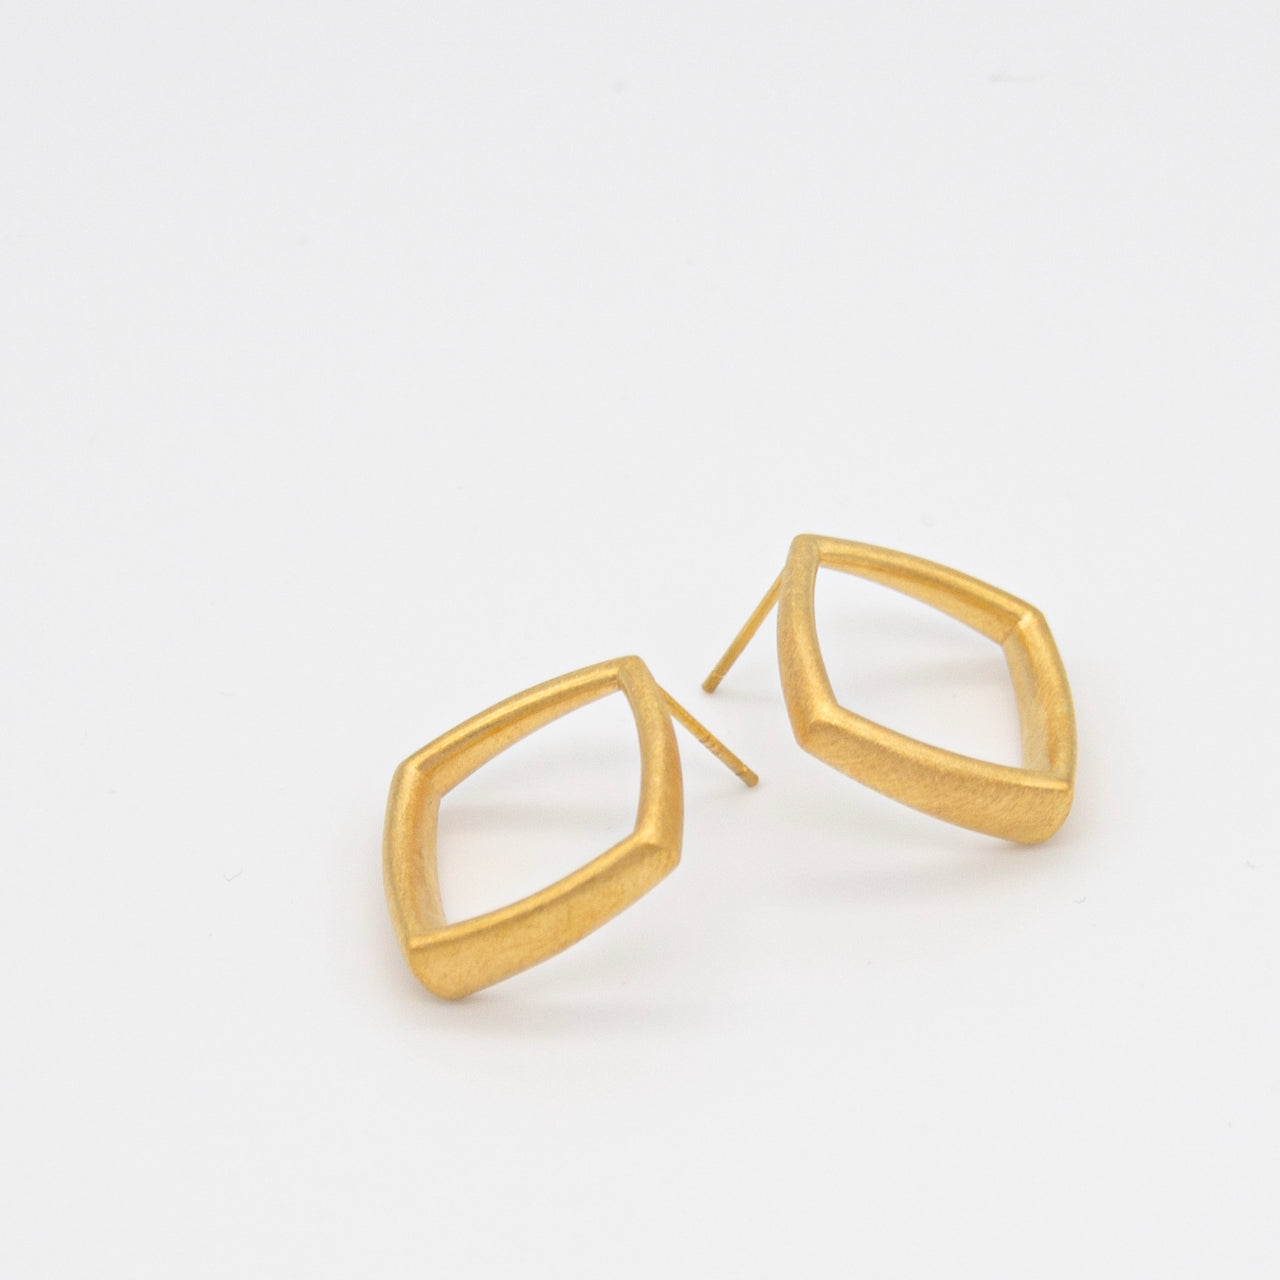 Curved Curves Rhombus Earrings Gold